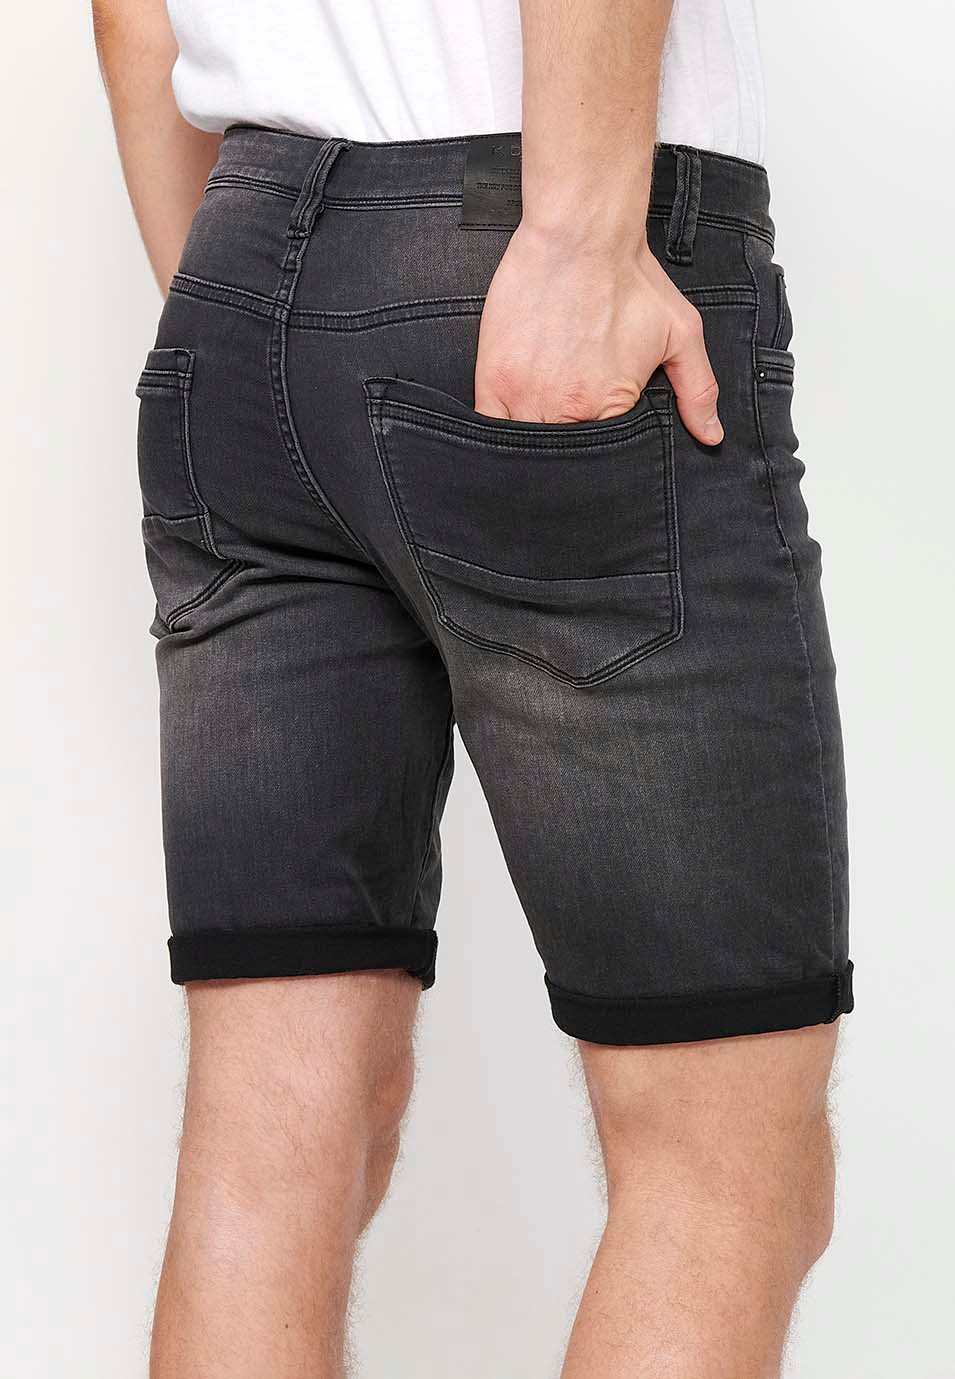 Shorts with turn-up finish with front closure with zipper and button in Black for Men 6